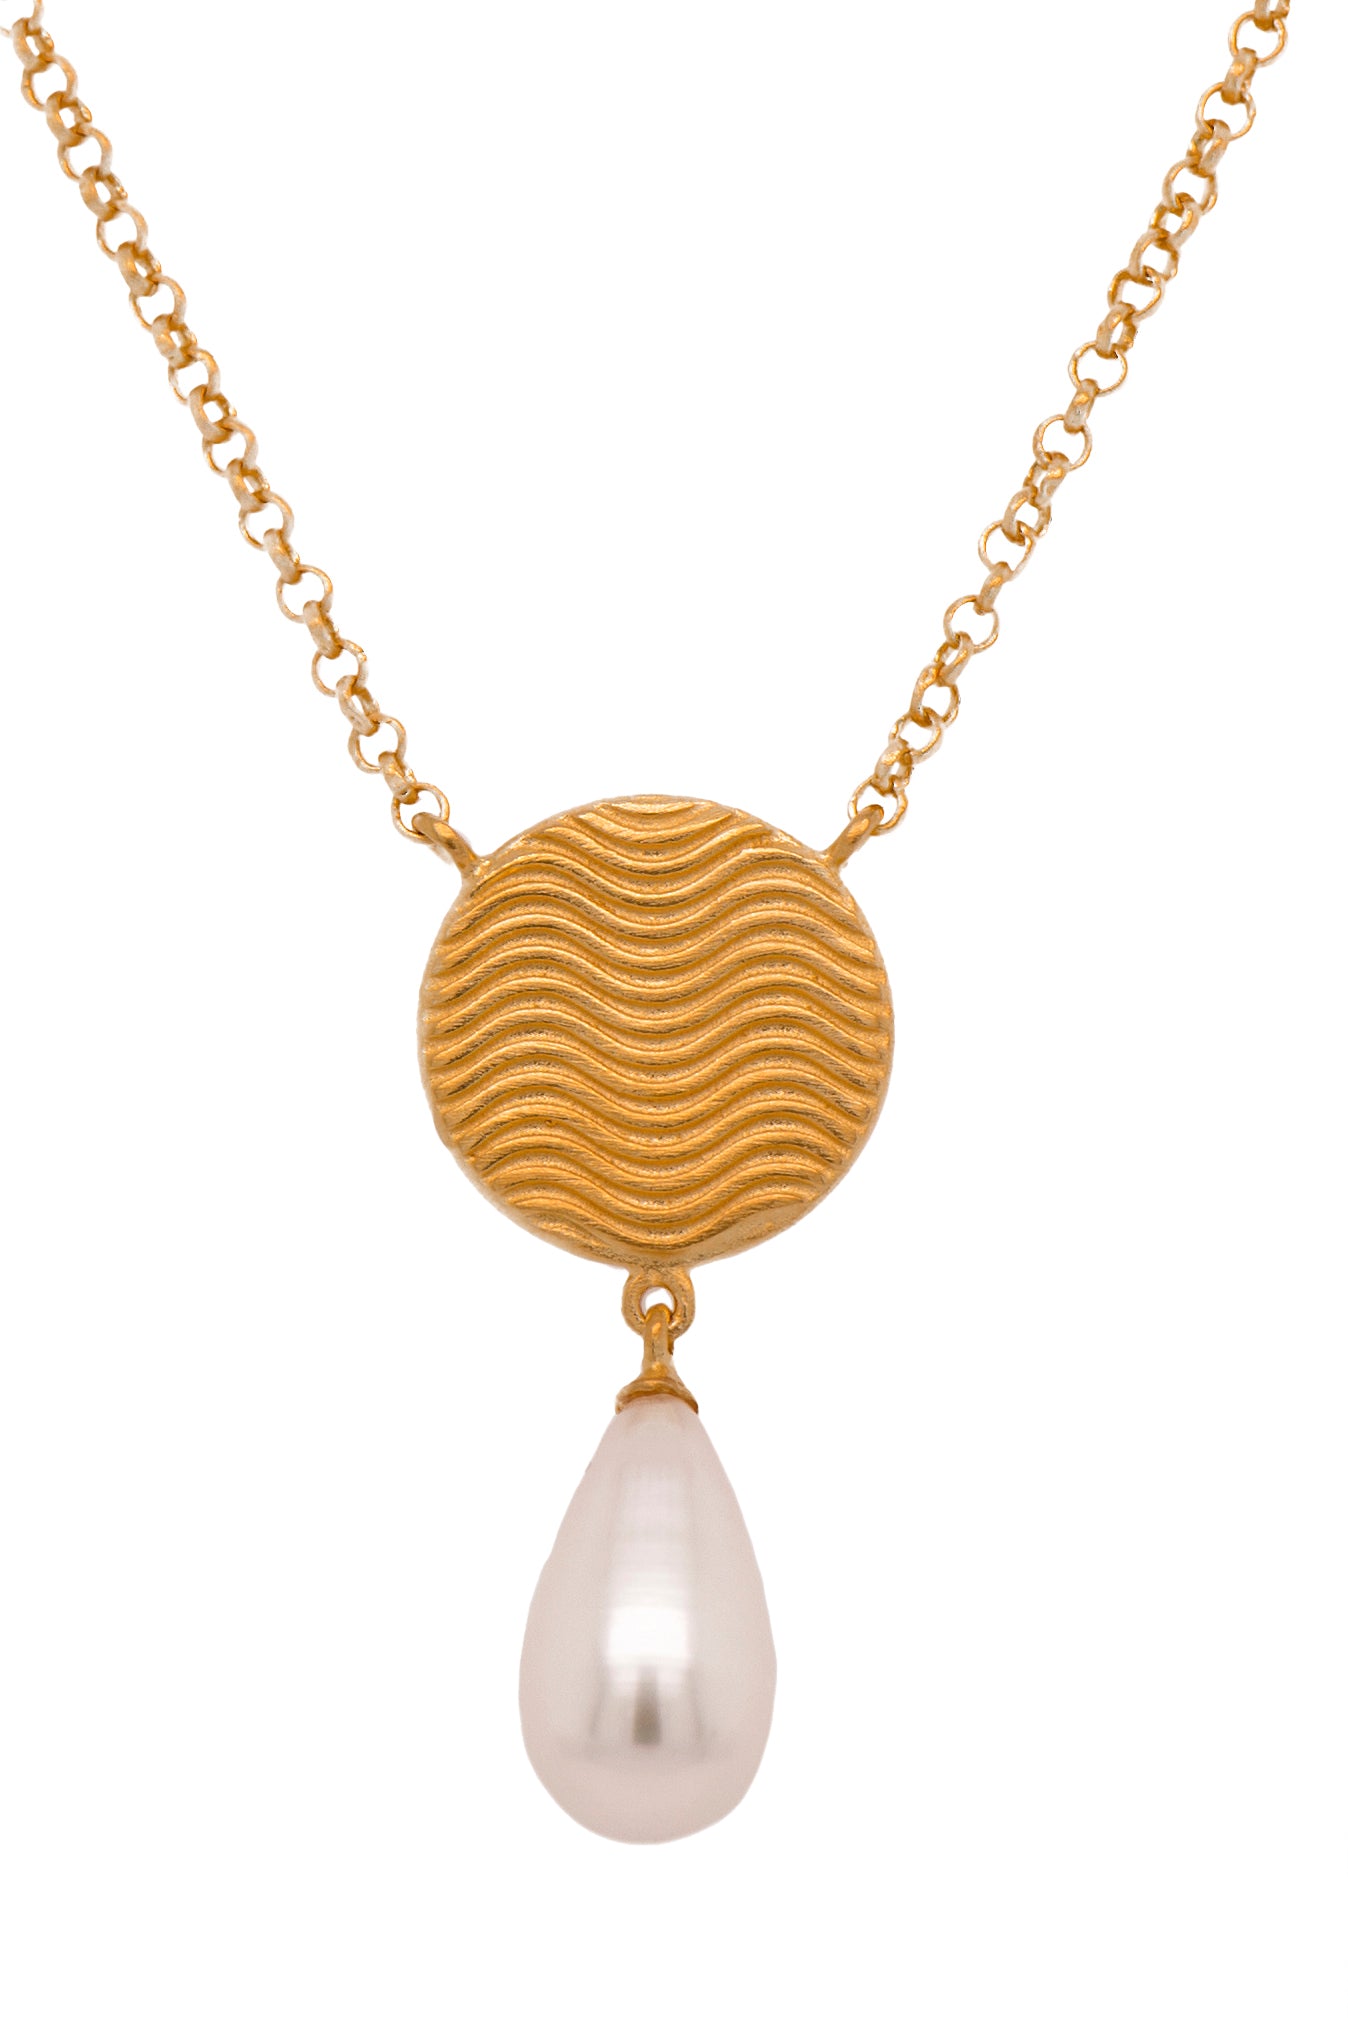 Pearl 15mm Drop Serenity Necklace 24K Gold Vermeil